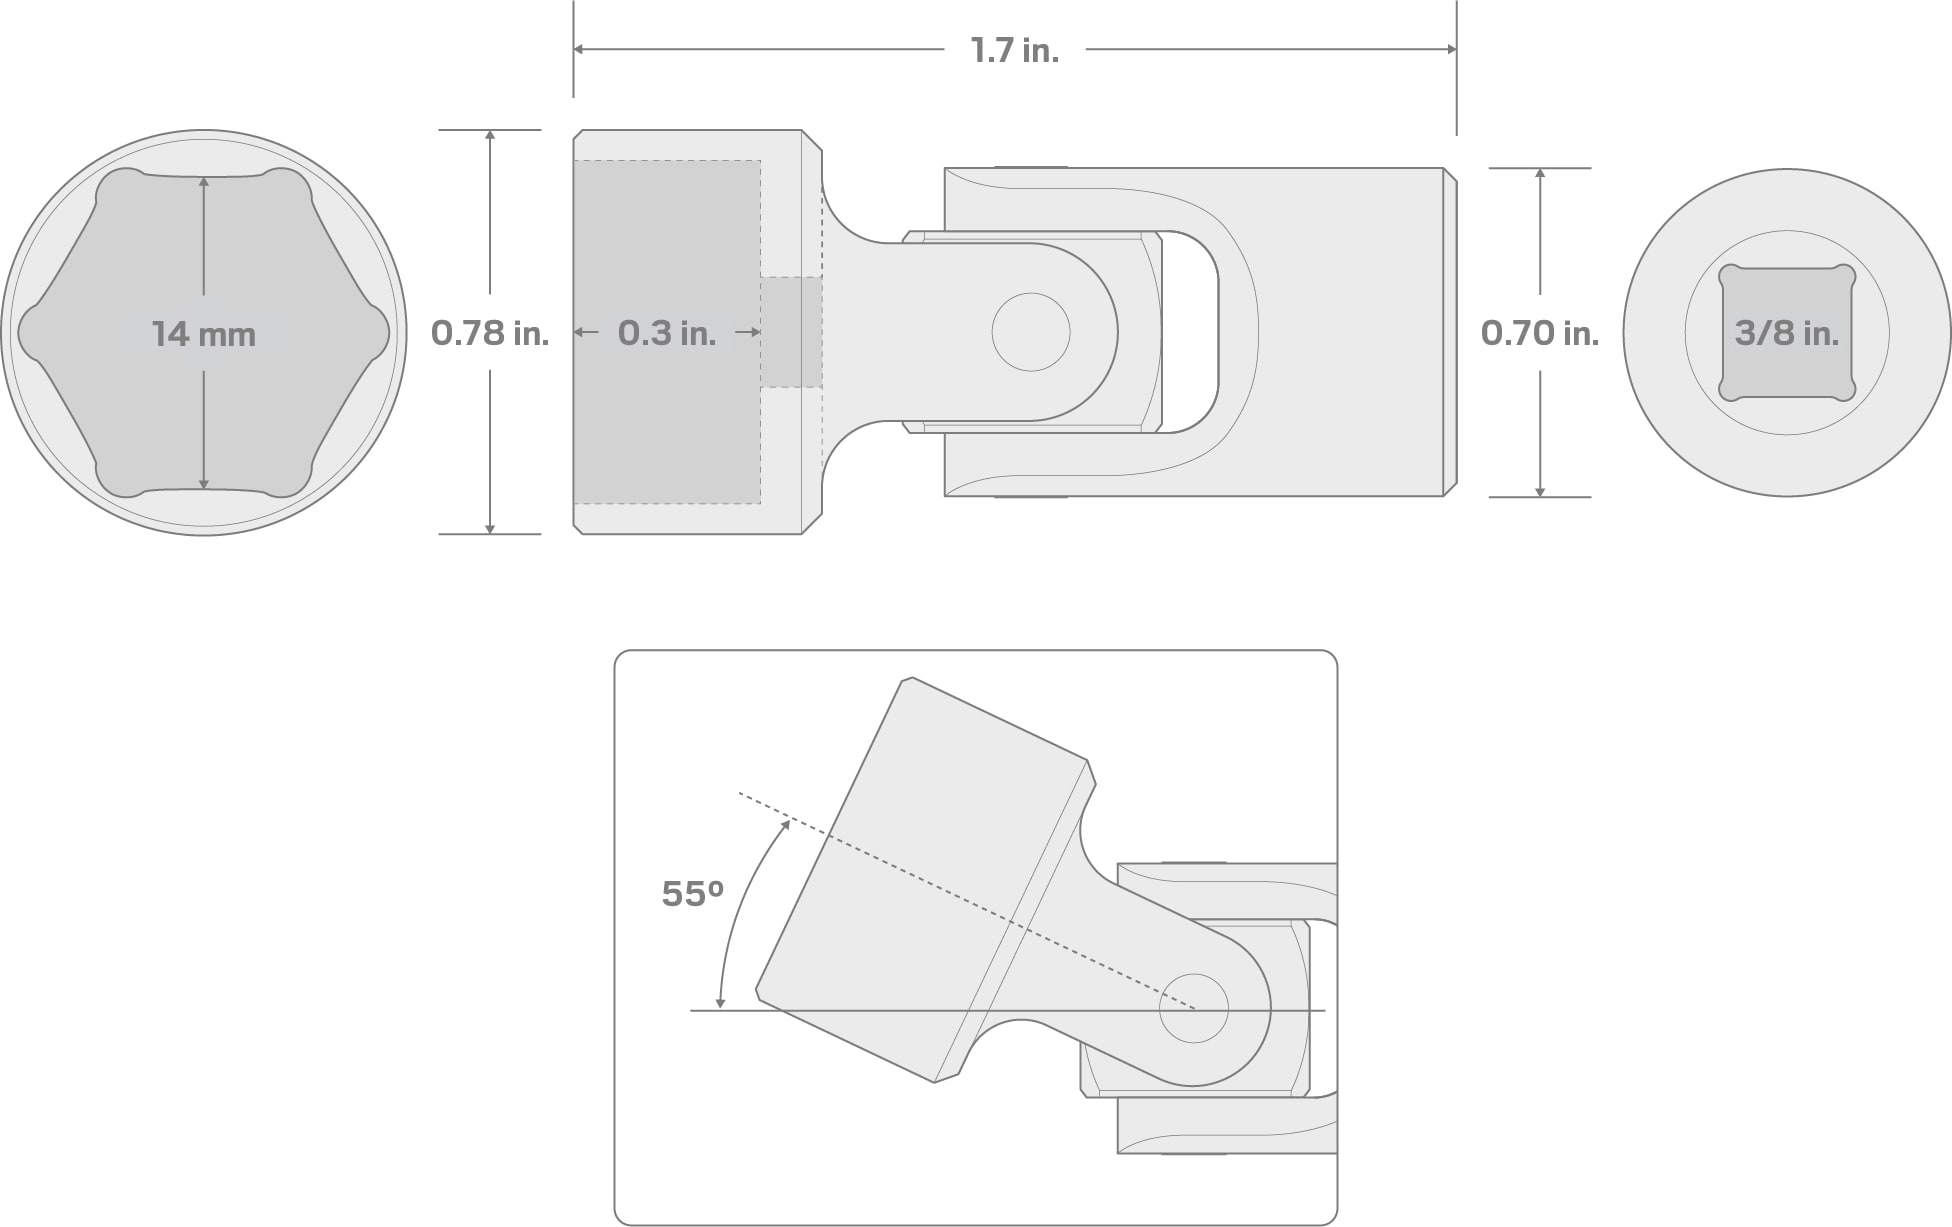 Specs for 3/8 Inch Drive x 14 mm Universal Joint Socket